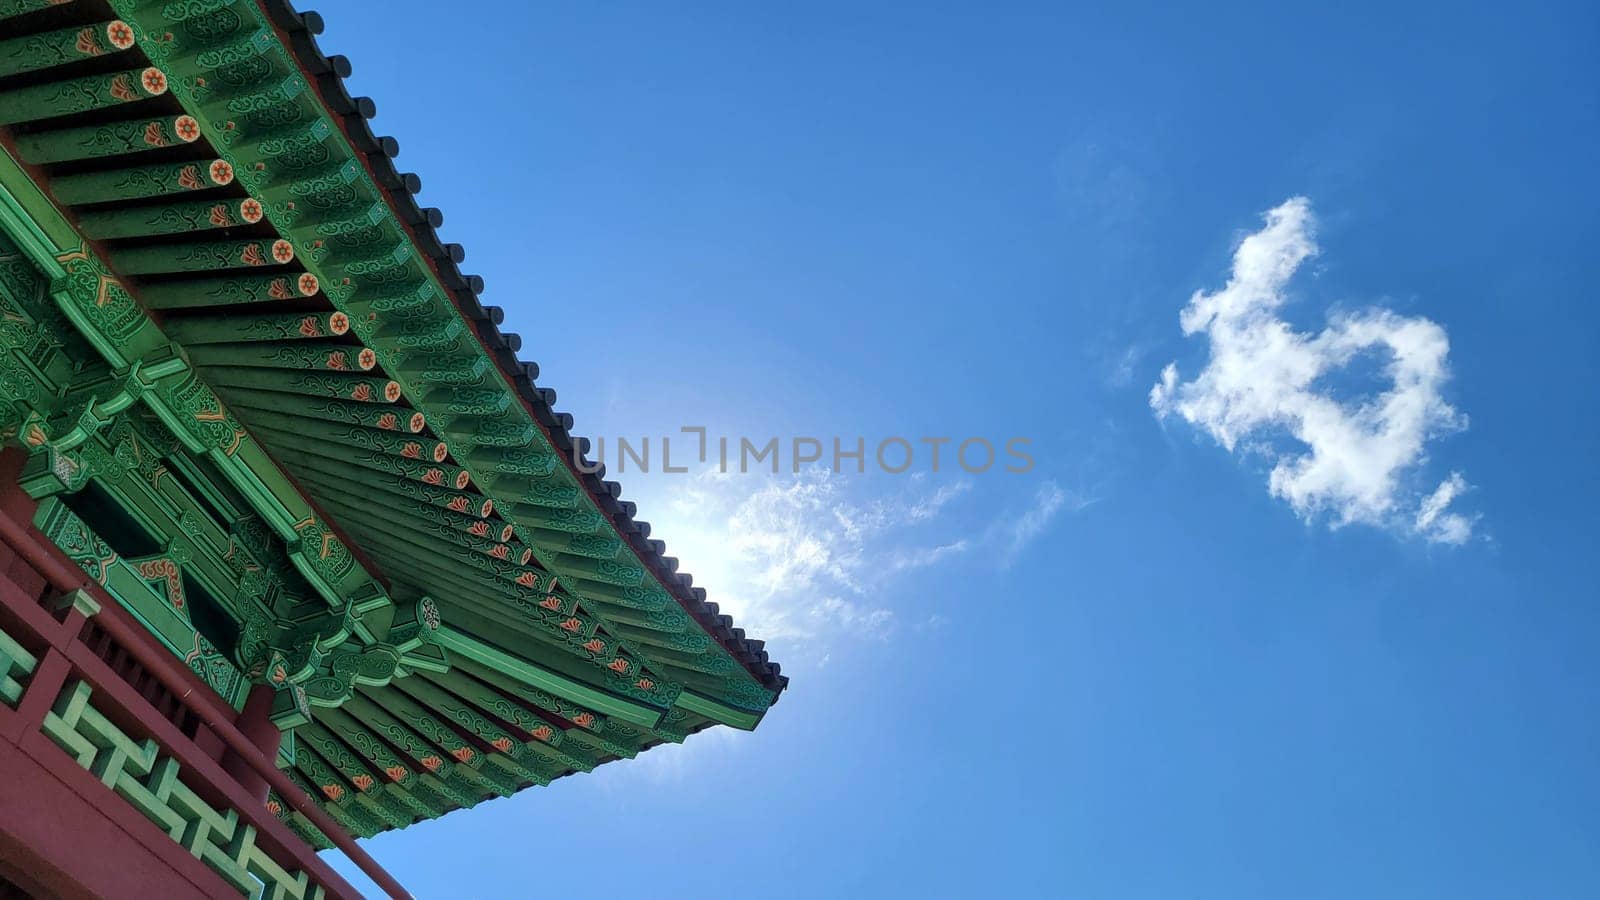 architecture,cloud,daytime,green,leaf,plant,roof,sky,sunlight,tree